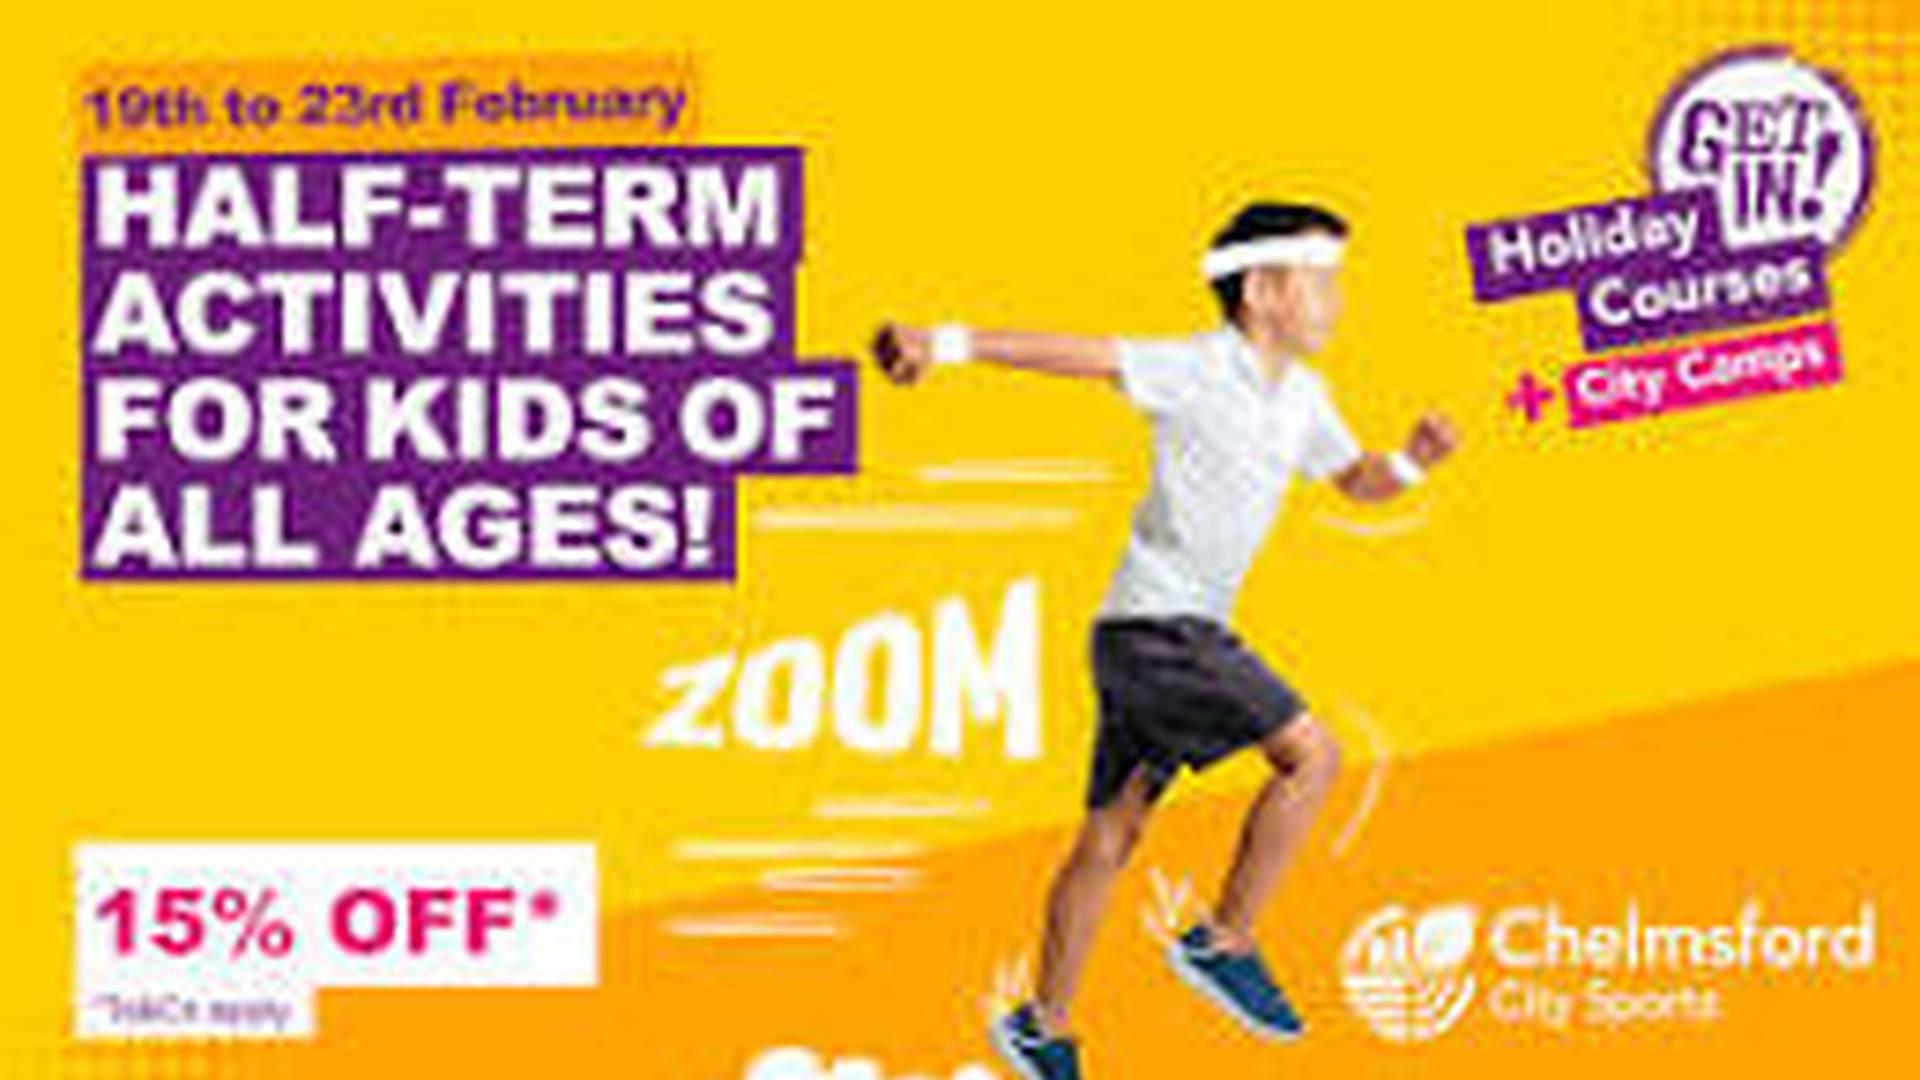 Half term fun for everyone | February kids courses for all ages photo